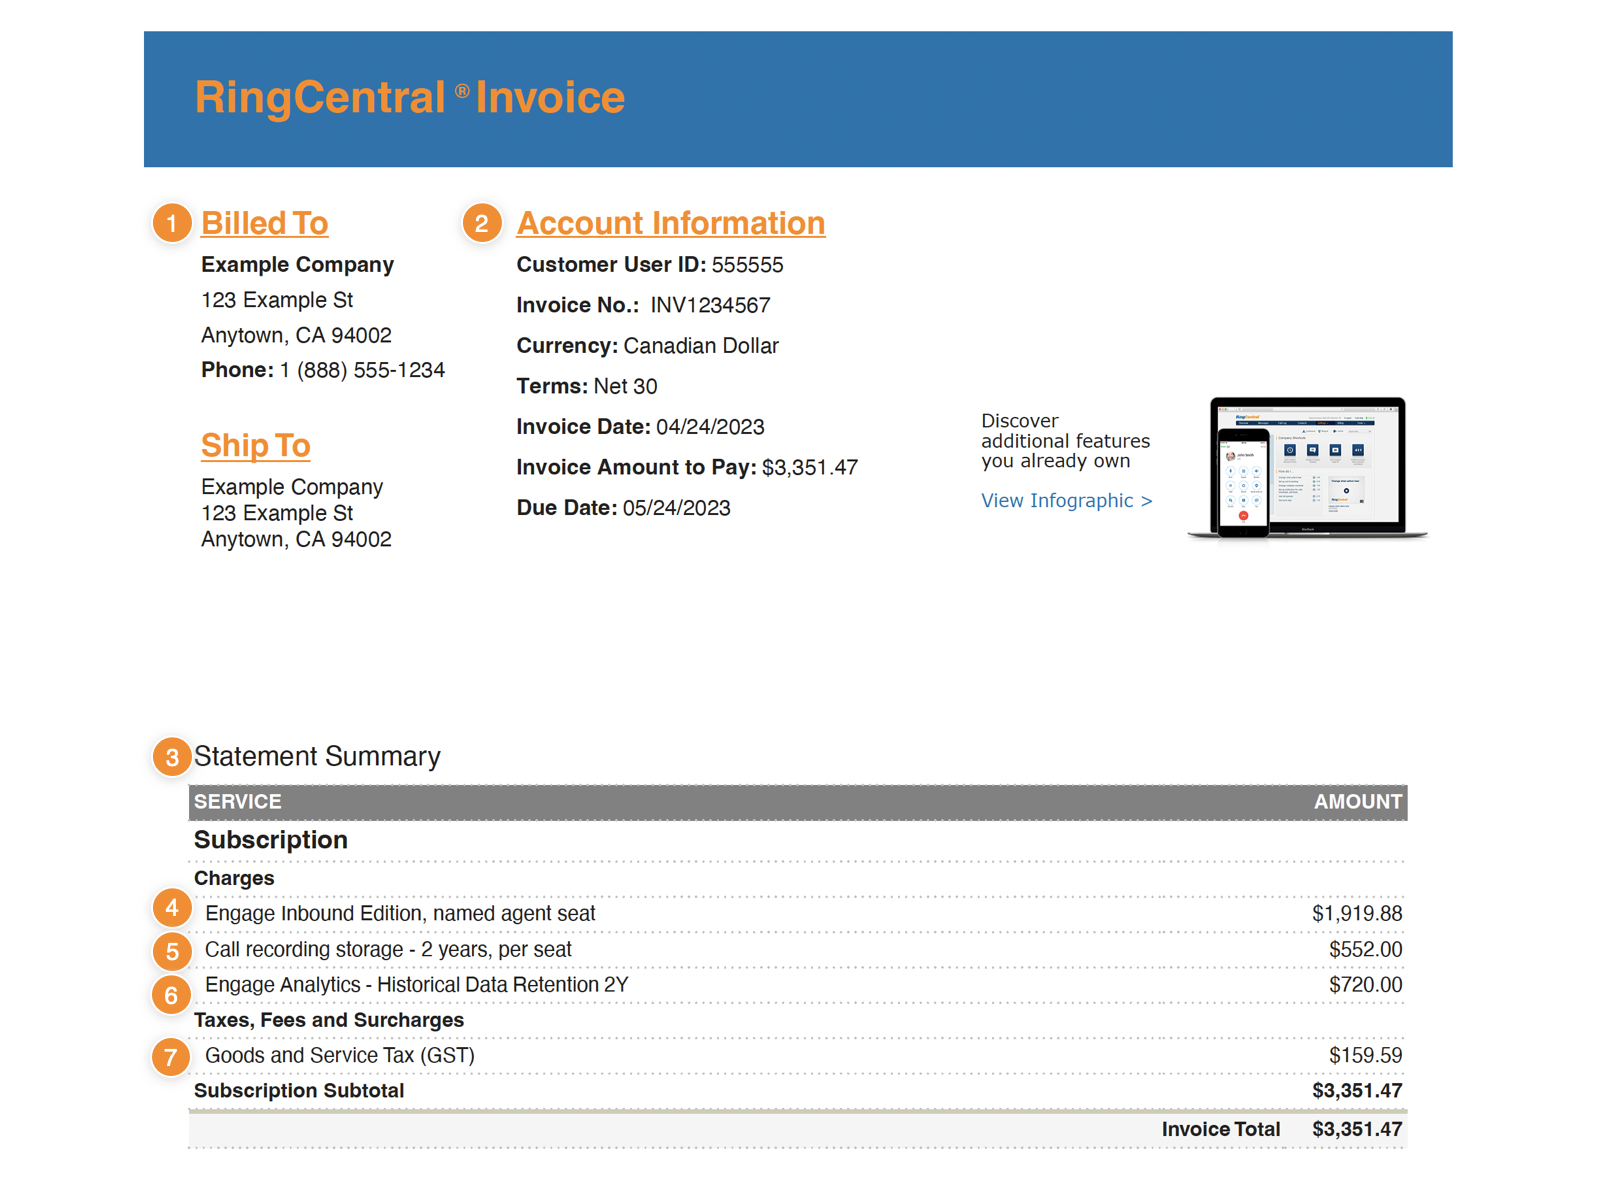 Article - What is RingCentral?